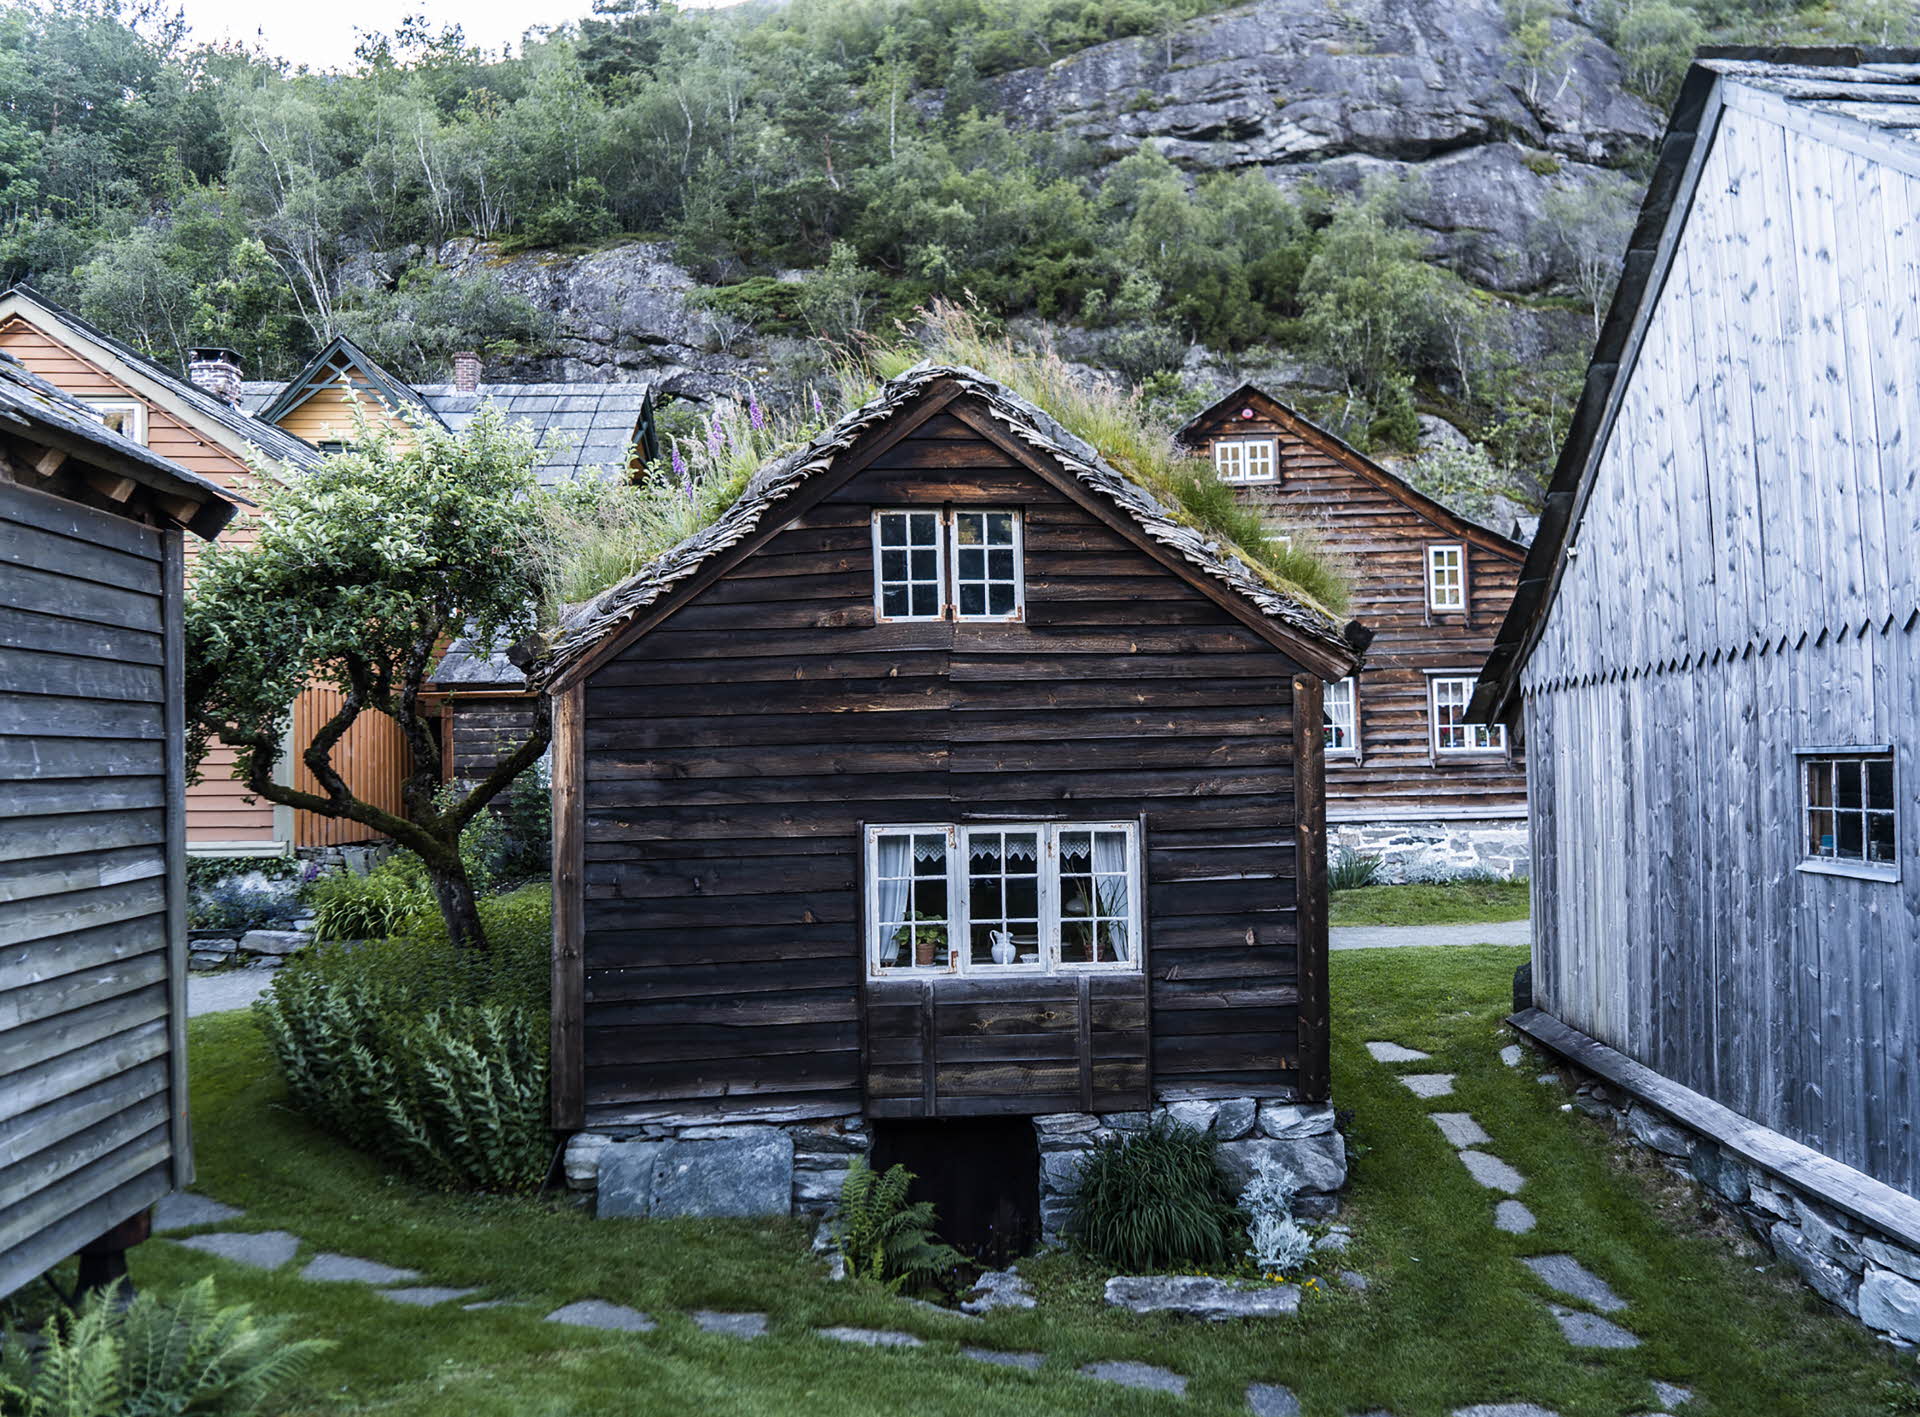 Small brown wooden house Agatunet Hardanger Norway early 1220 gras on roof resting on natural stones